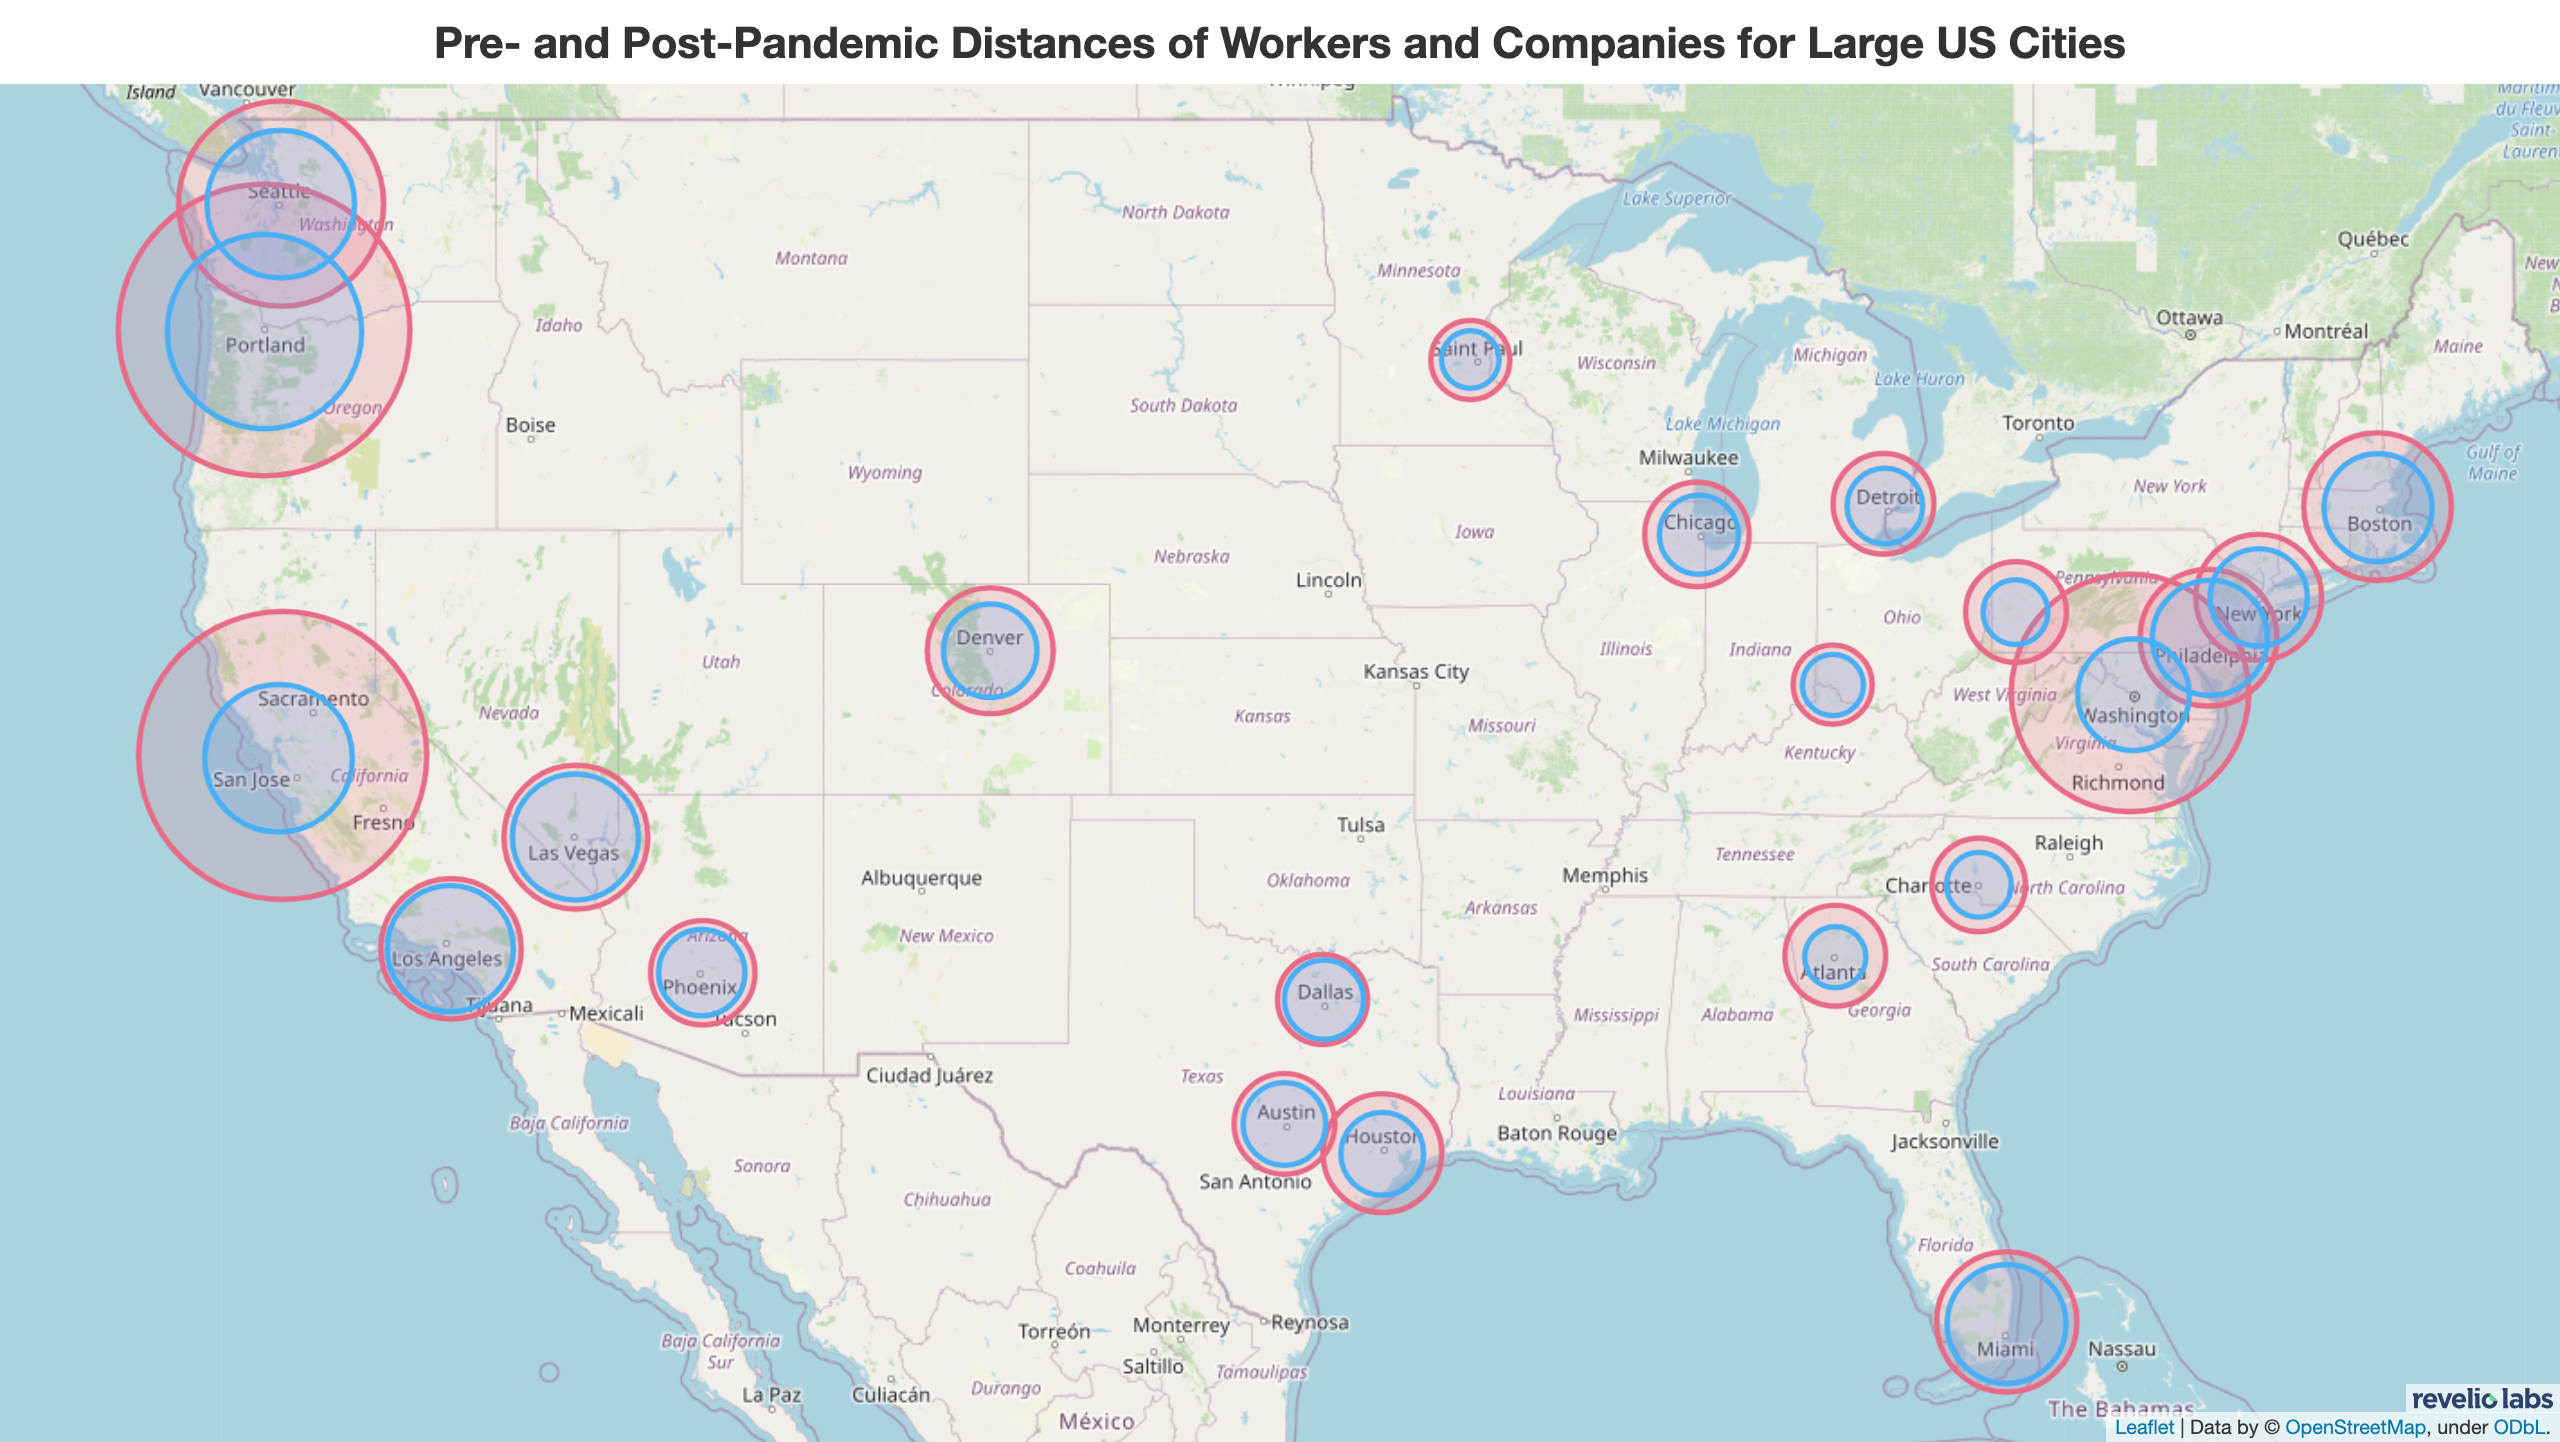 Pre- and Post- Pandemic Distances of Workers and Companies for Large US Cities